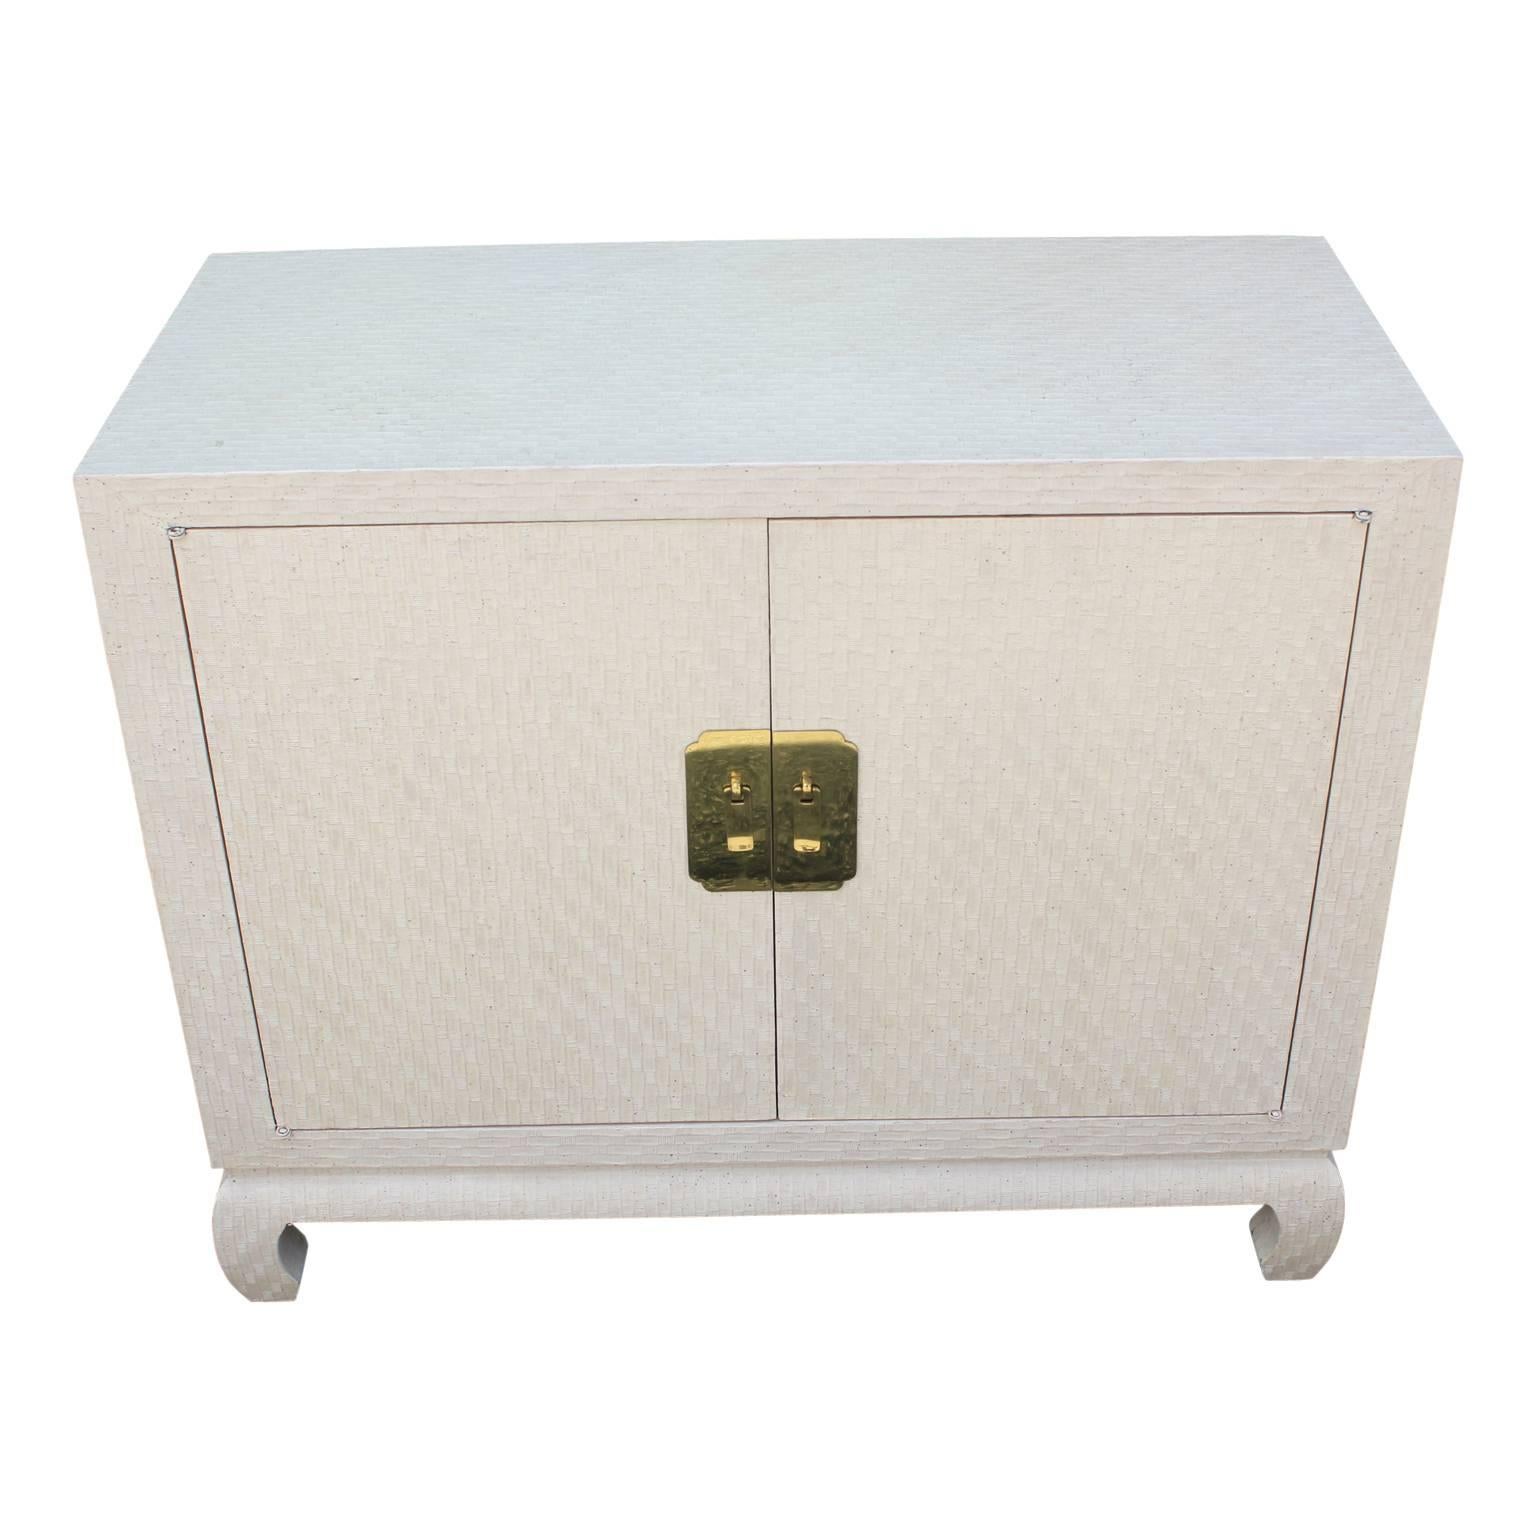 Cream colored lacquered grass cloth cabinet from Baker's Far East collection. Ming style turned legs, and large brass escutcheons backing solid brass drop pulls. The two doors open to reveal a single shelf.